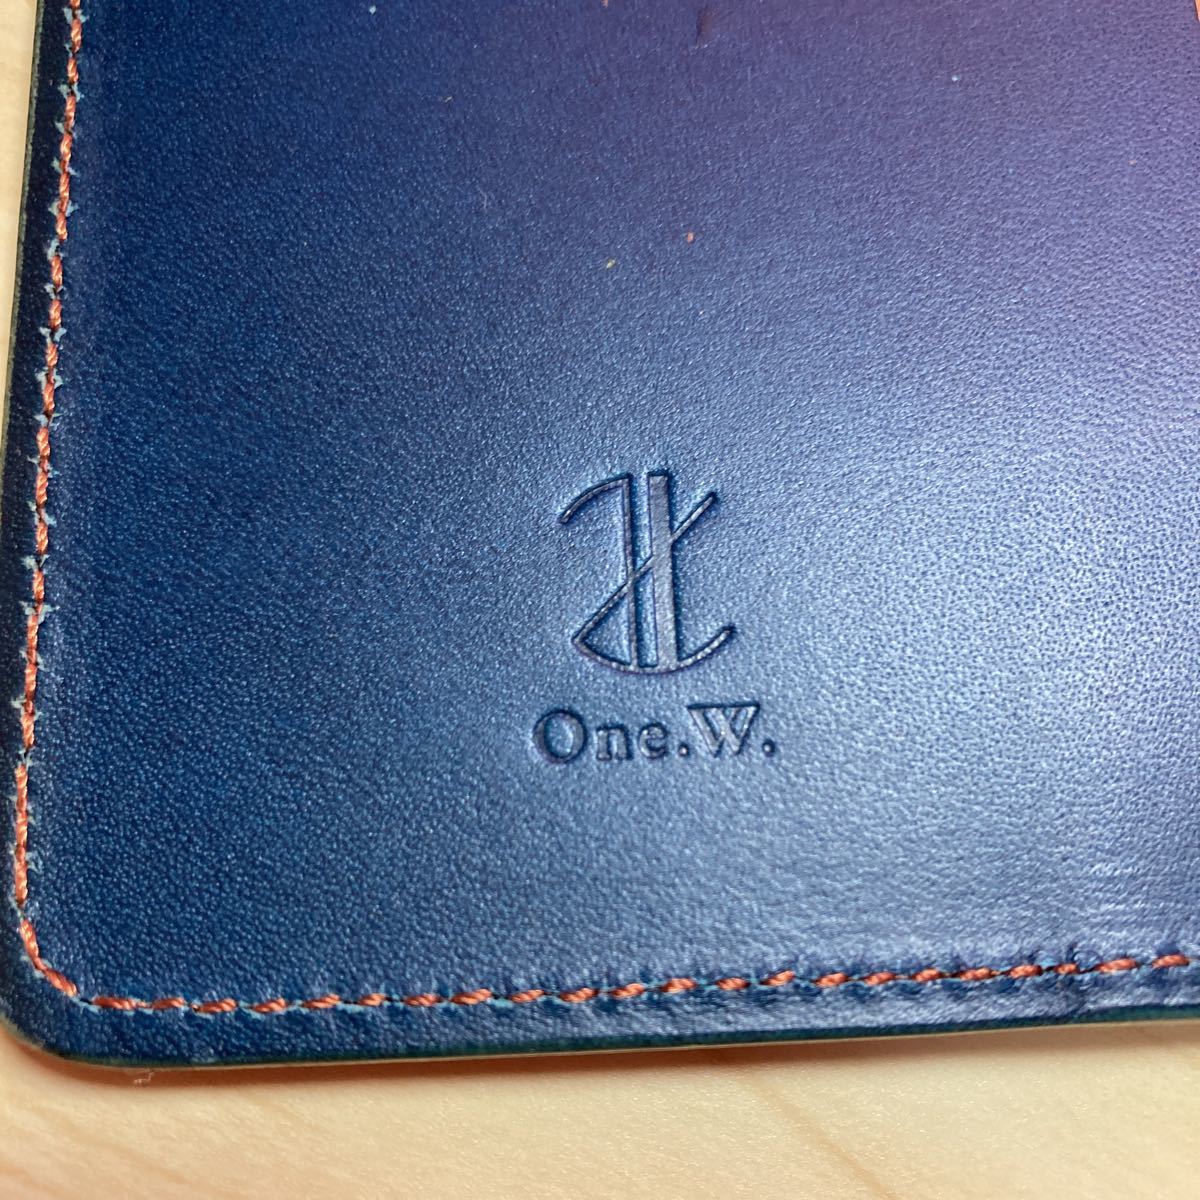  one world book cover pocketbook cover leather navy simple standard cover one.W. men's fine quality high class separate volume 